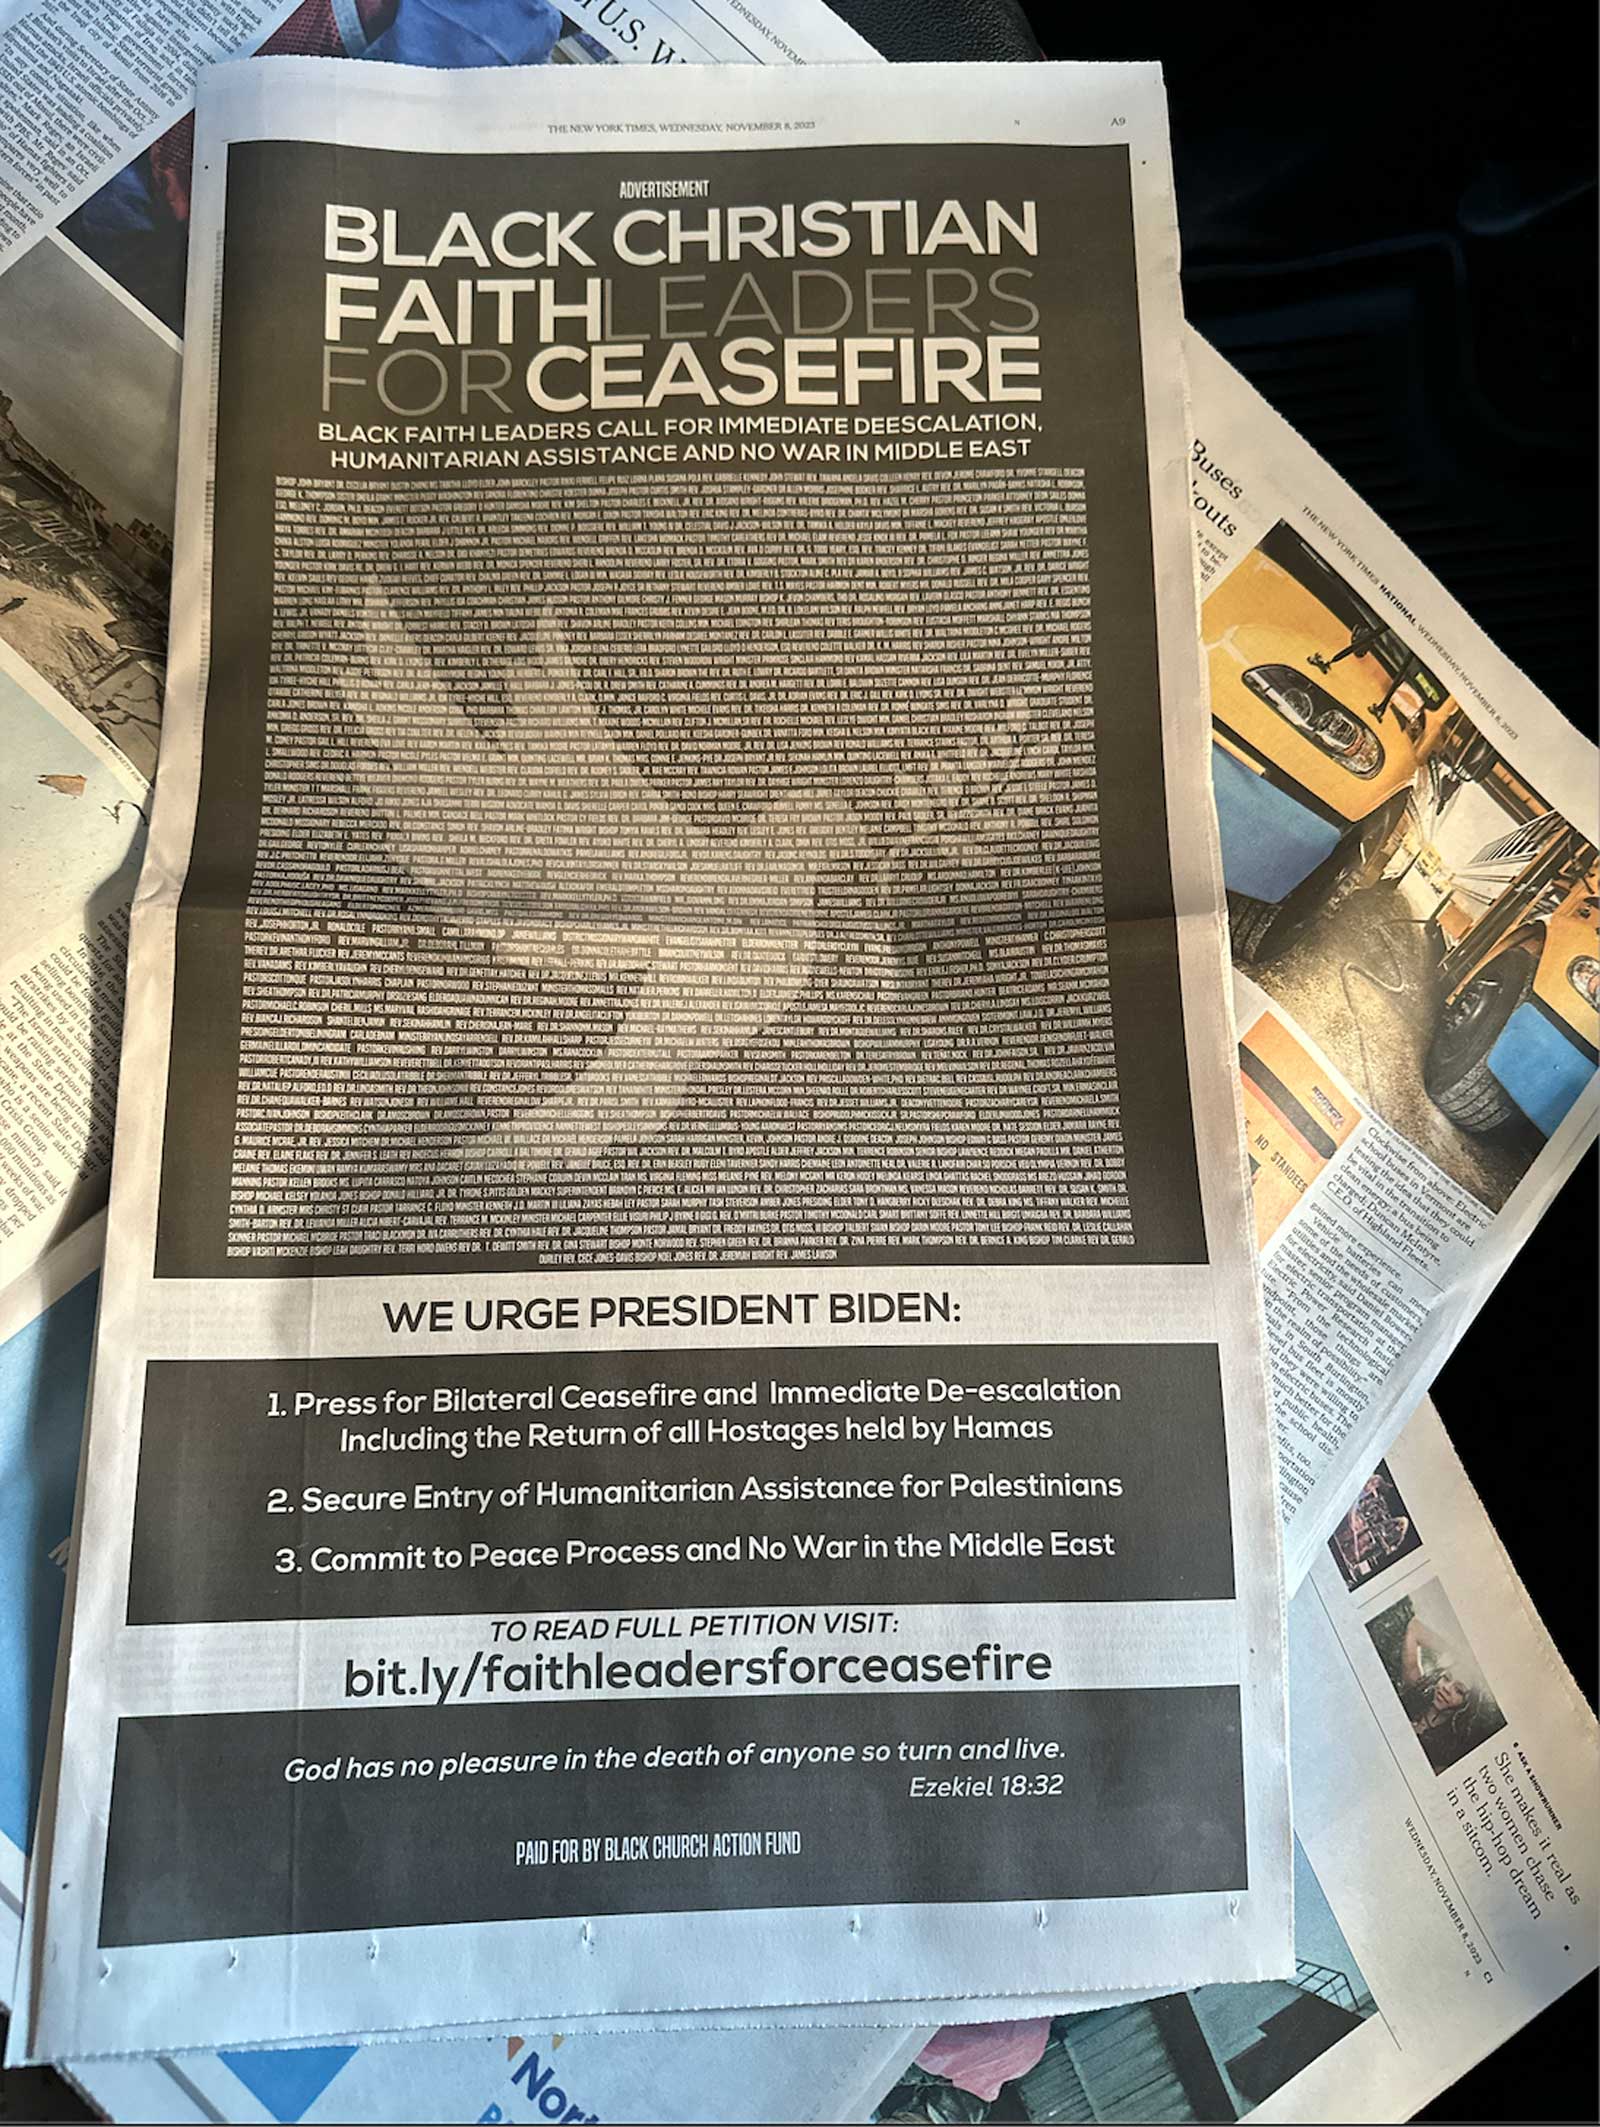 The New York Times, November 8th, 2023 Wednesday Edition on page A9 publishes 900+ Black Christian Faith Leaders Ad calling for Ceasefire in Israel-Hamas War. 